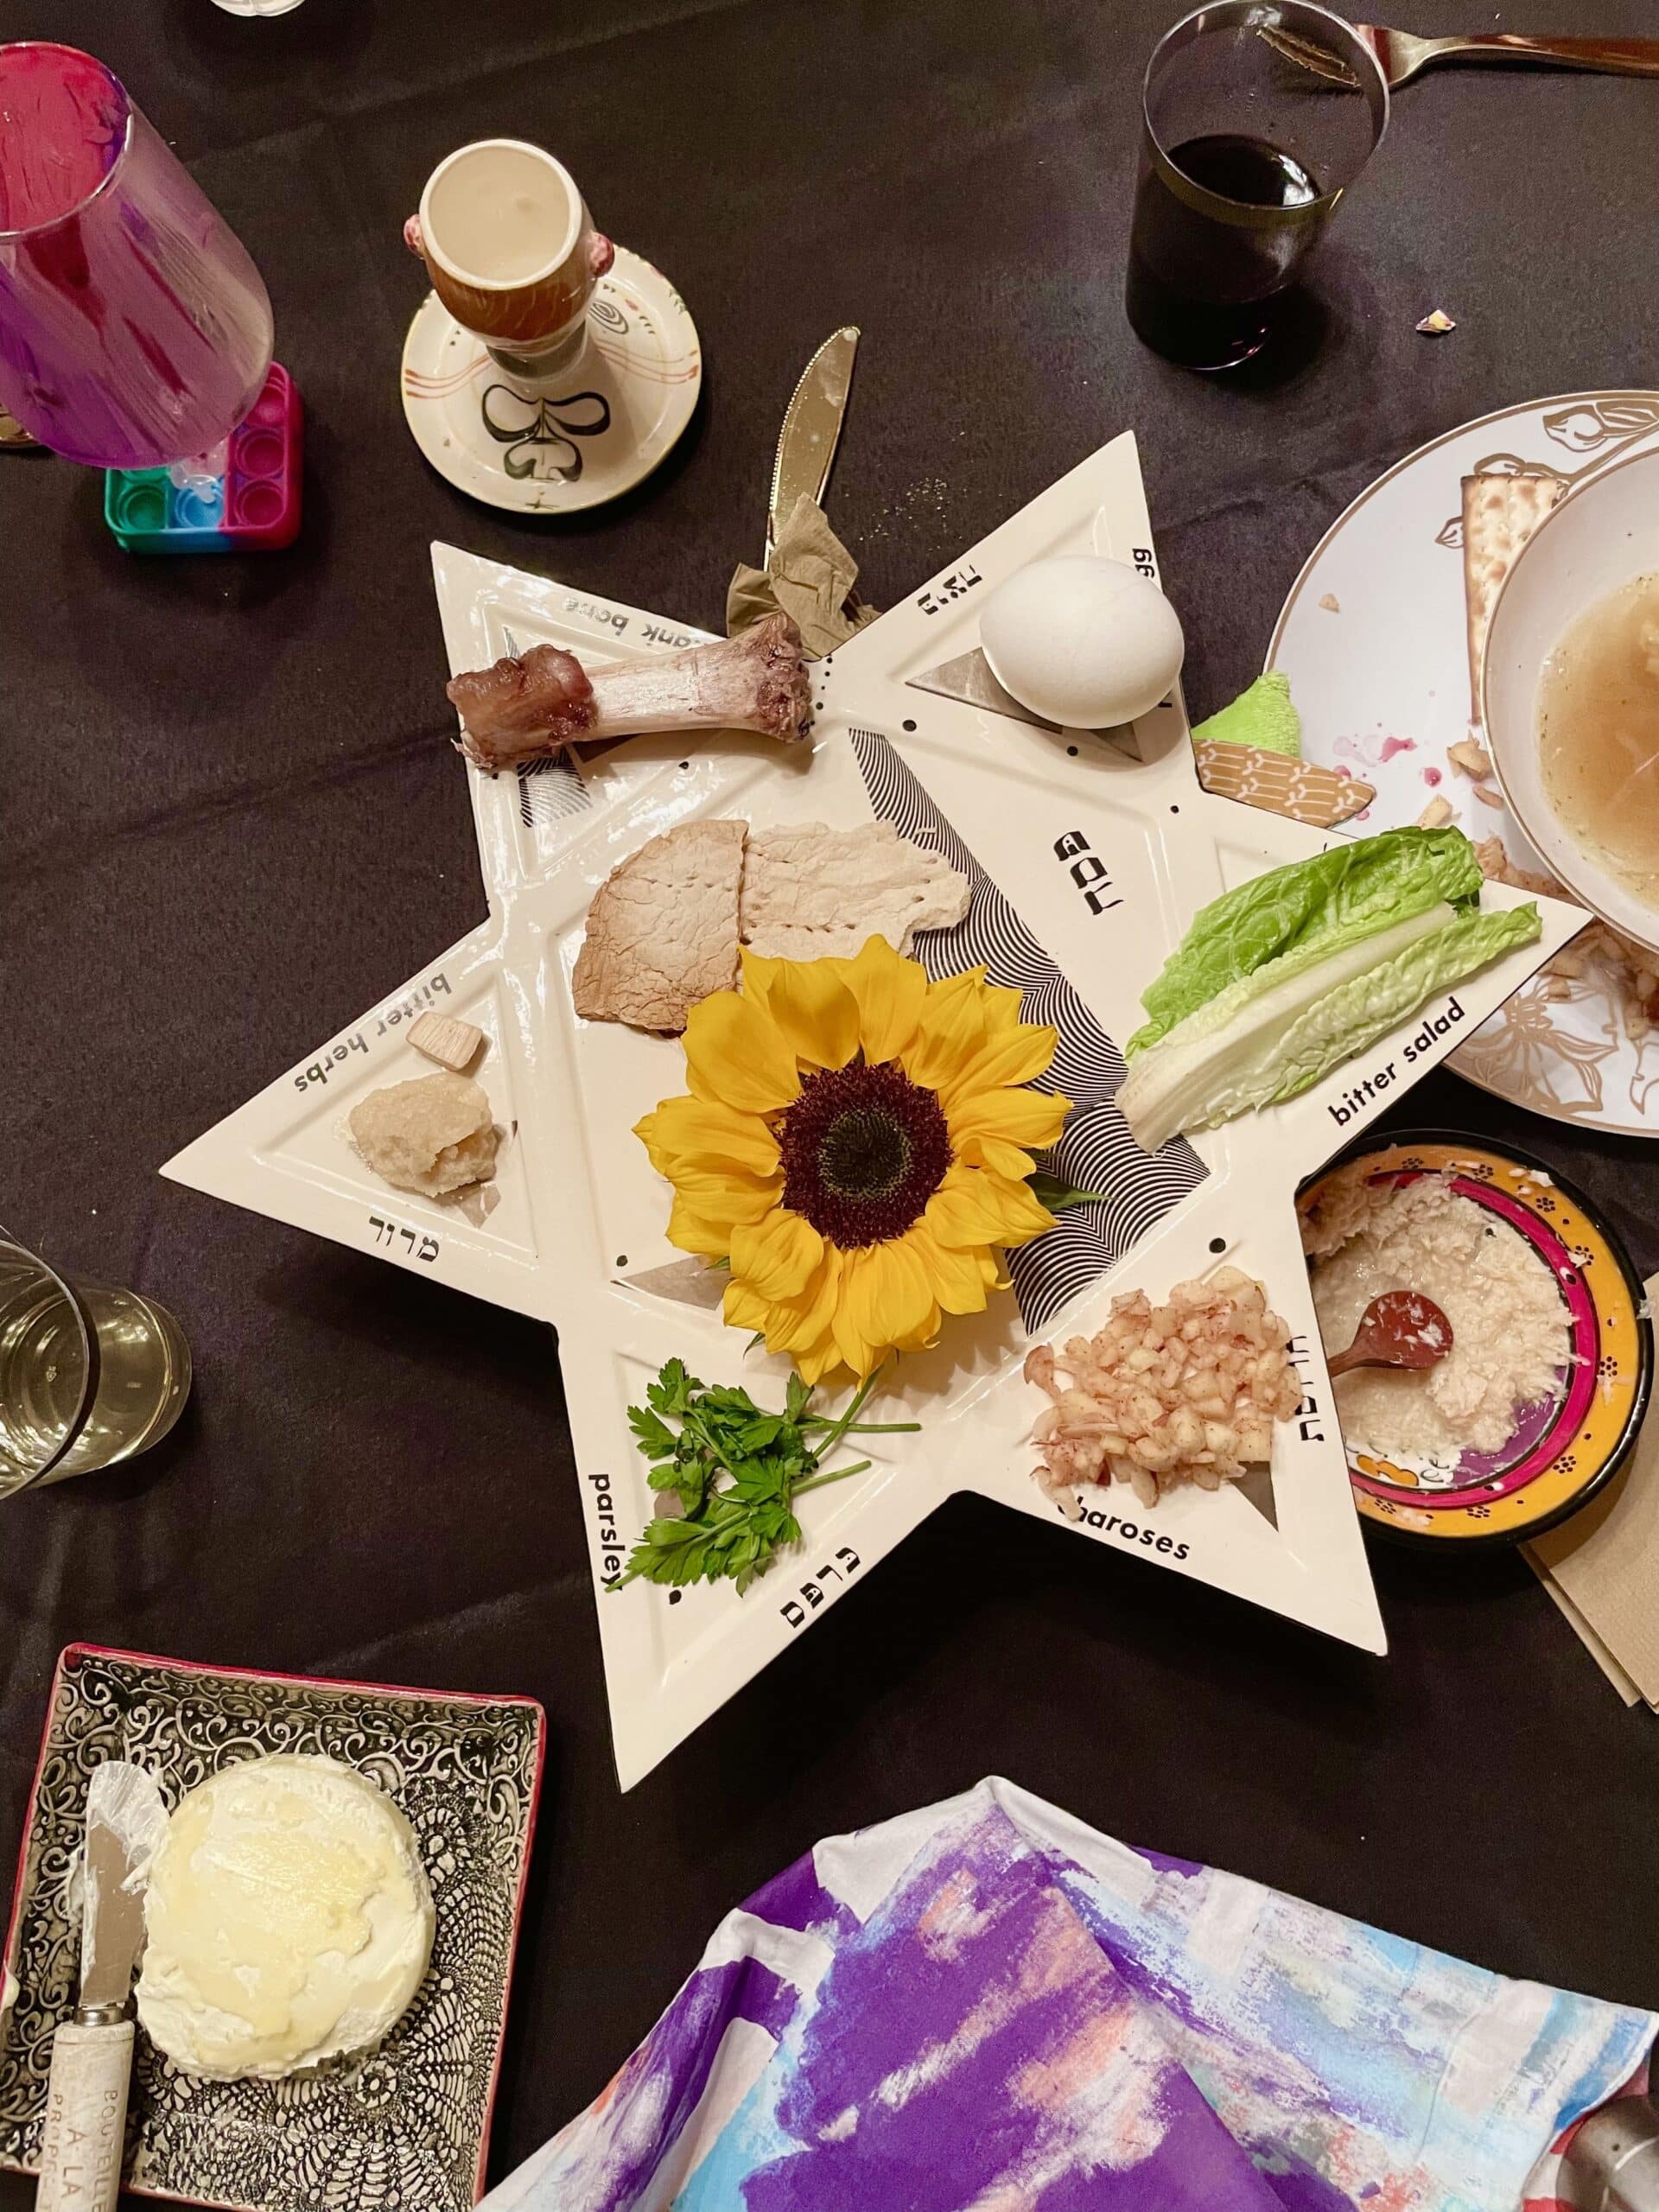 A Seder plate with a sunflower in the center.